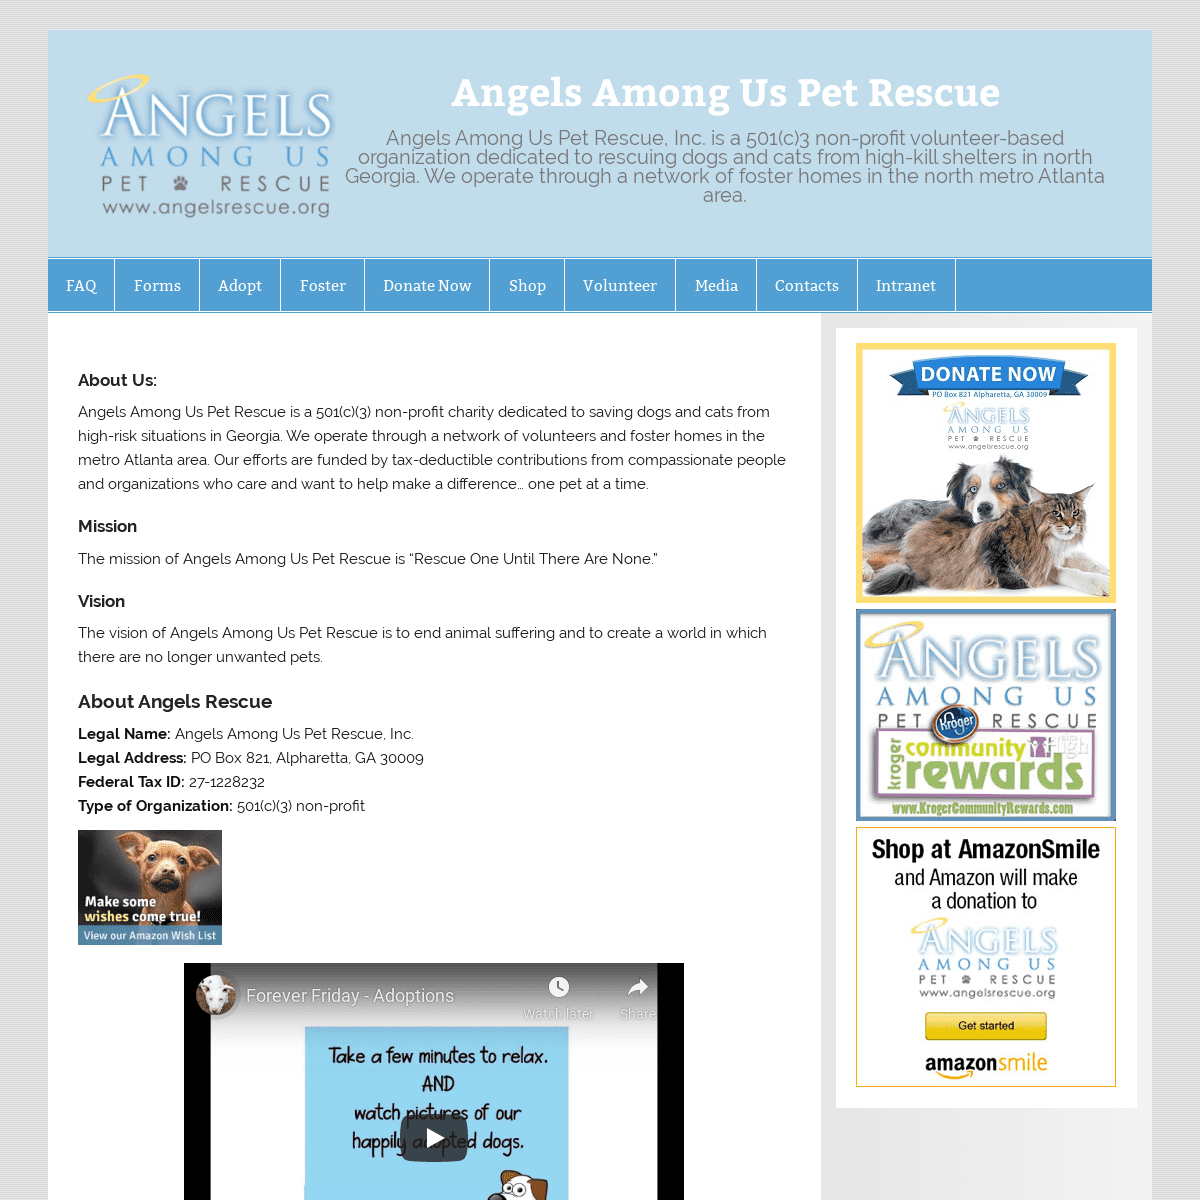 A complete backup of https://angelsrescue.org